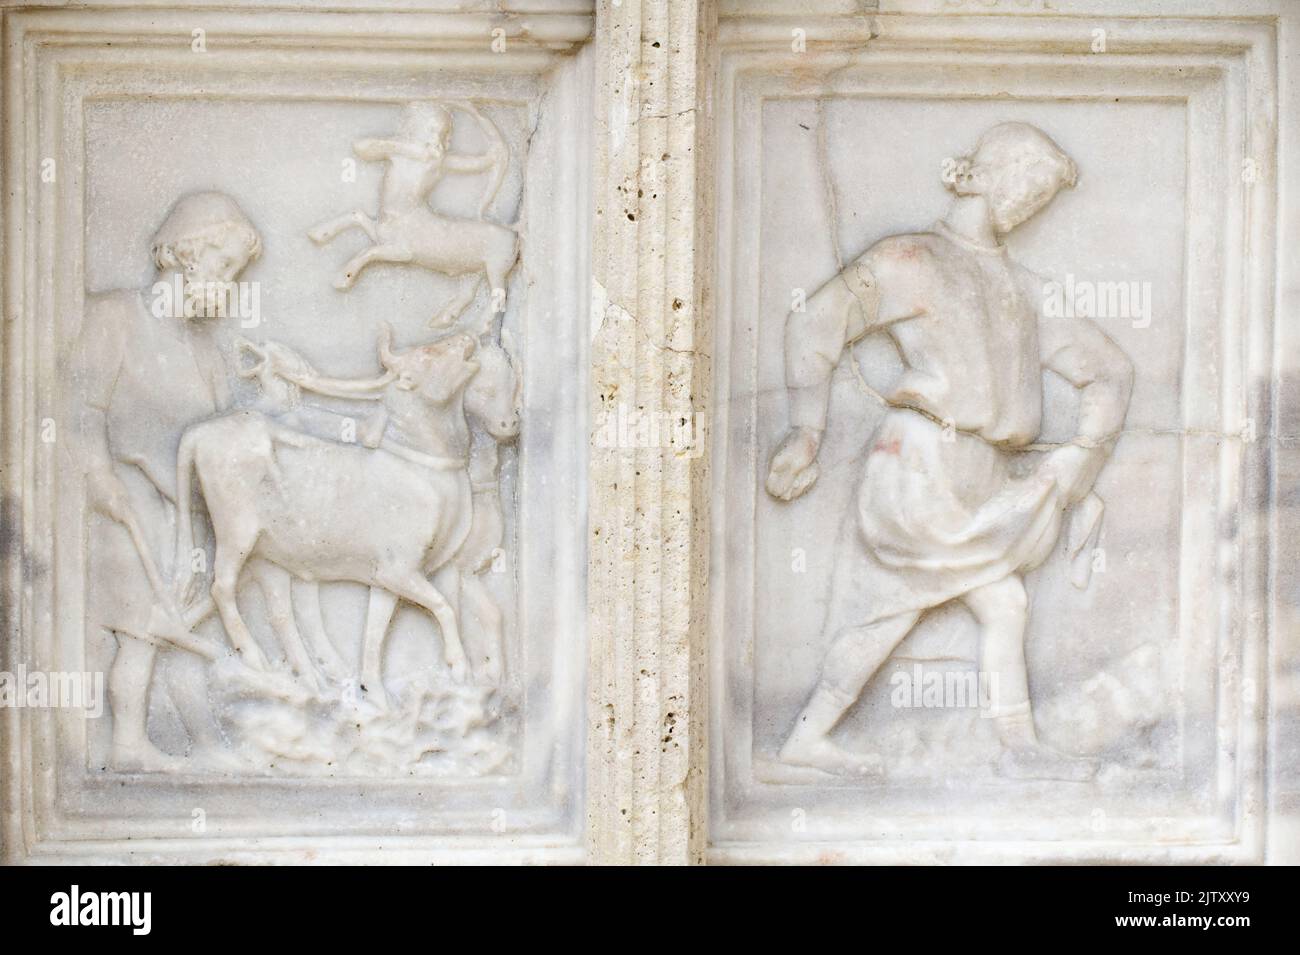 November: The ploughing and sowing - detail of Fontana Maggiore (1275), a masterpiece of medieval sculpture symbol of the city of Perugia - Italy Stock Photo